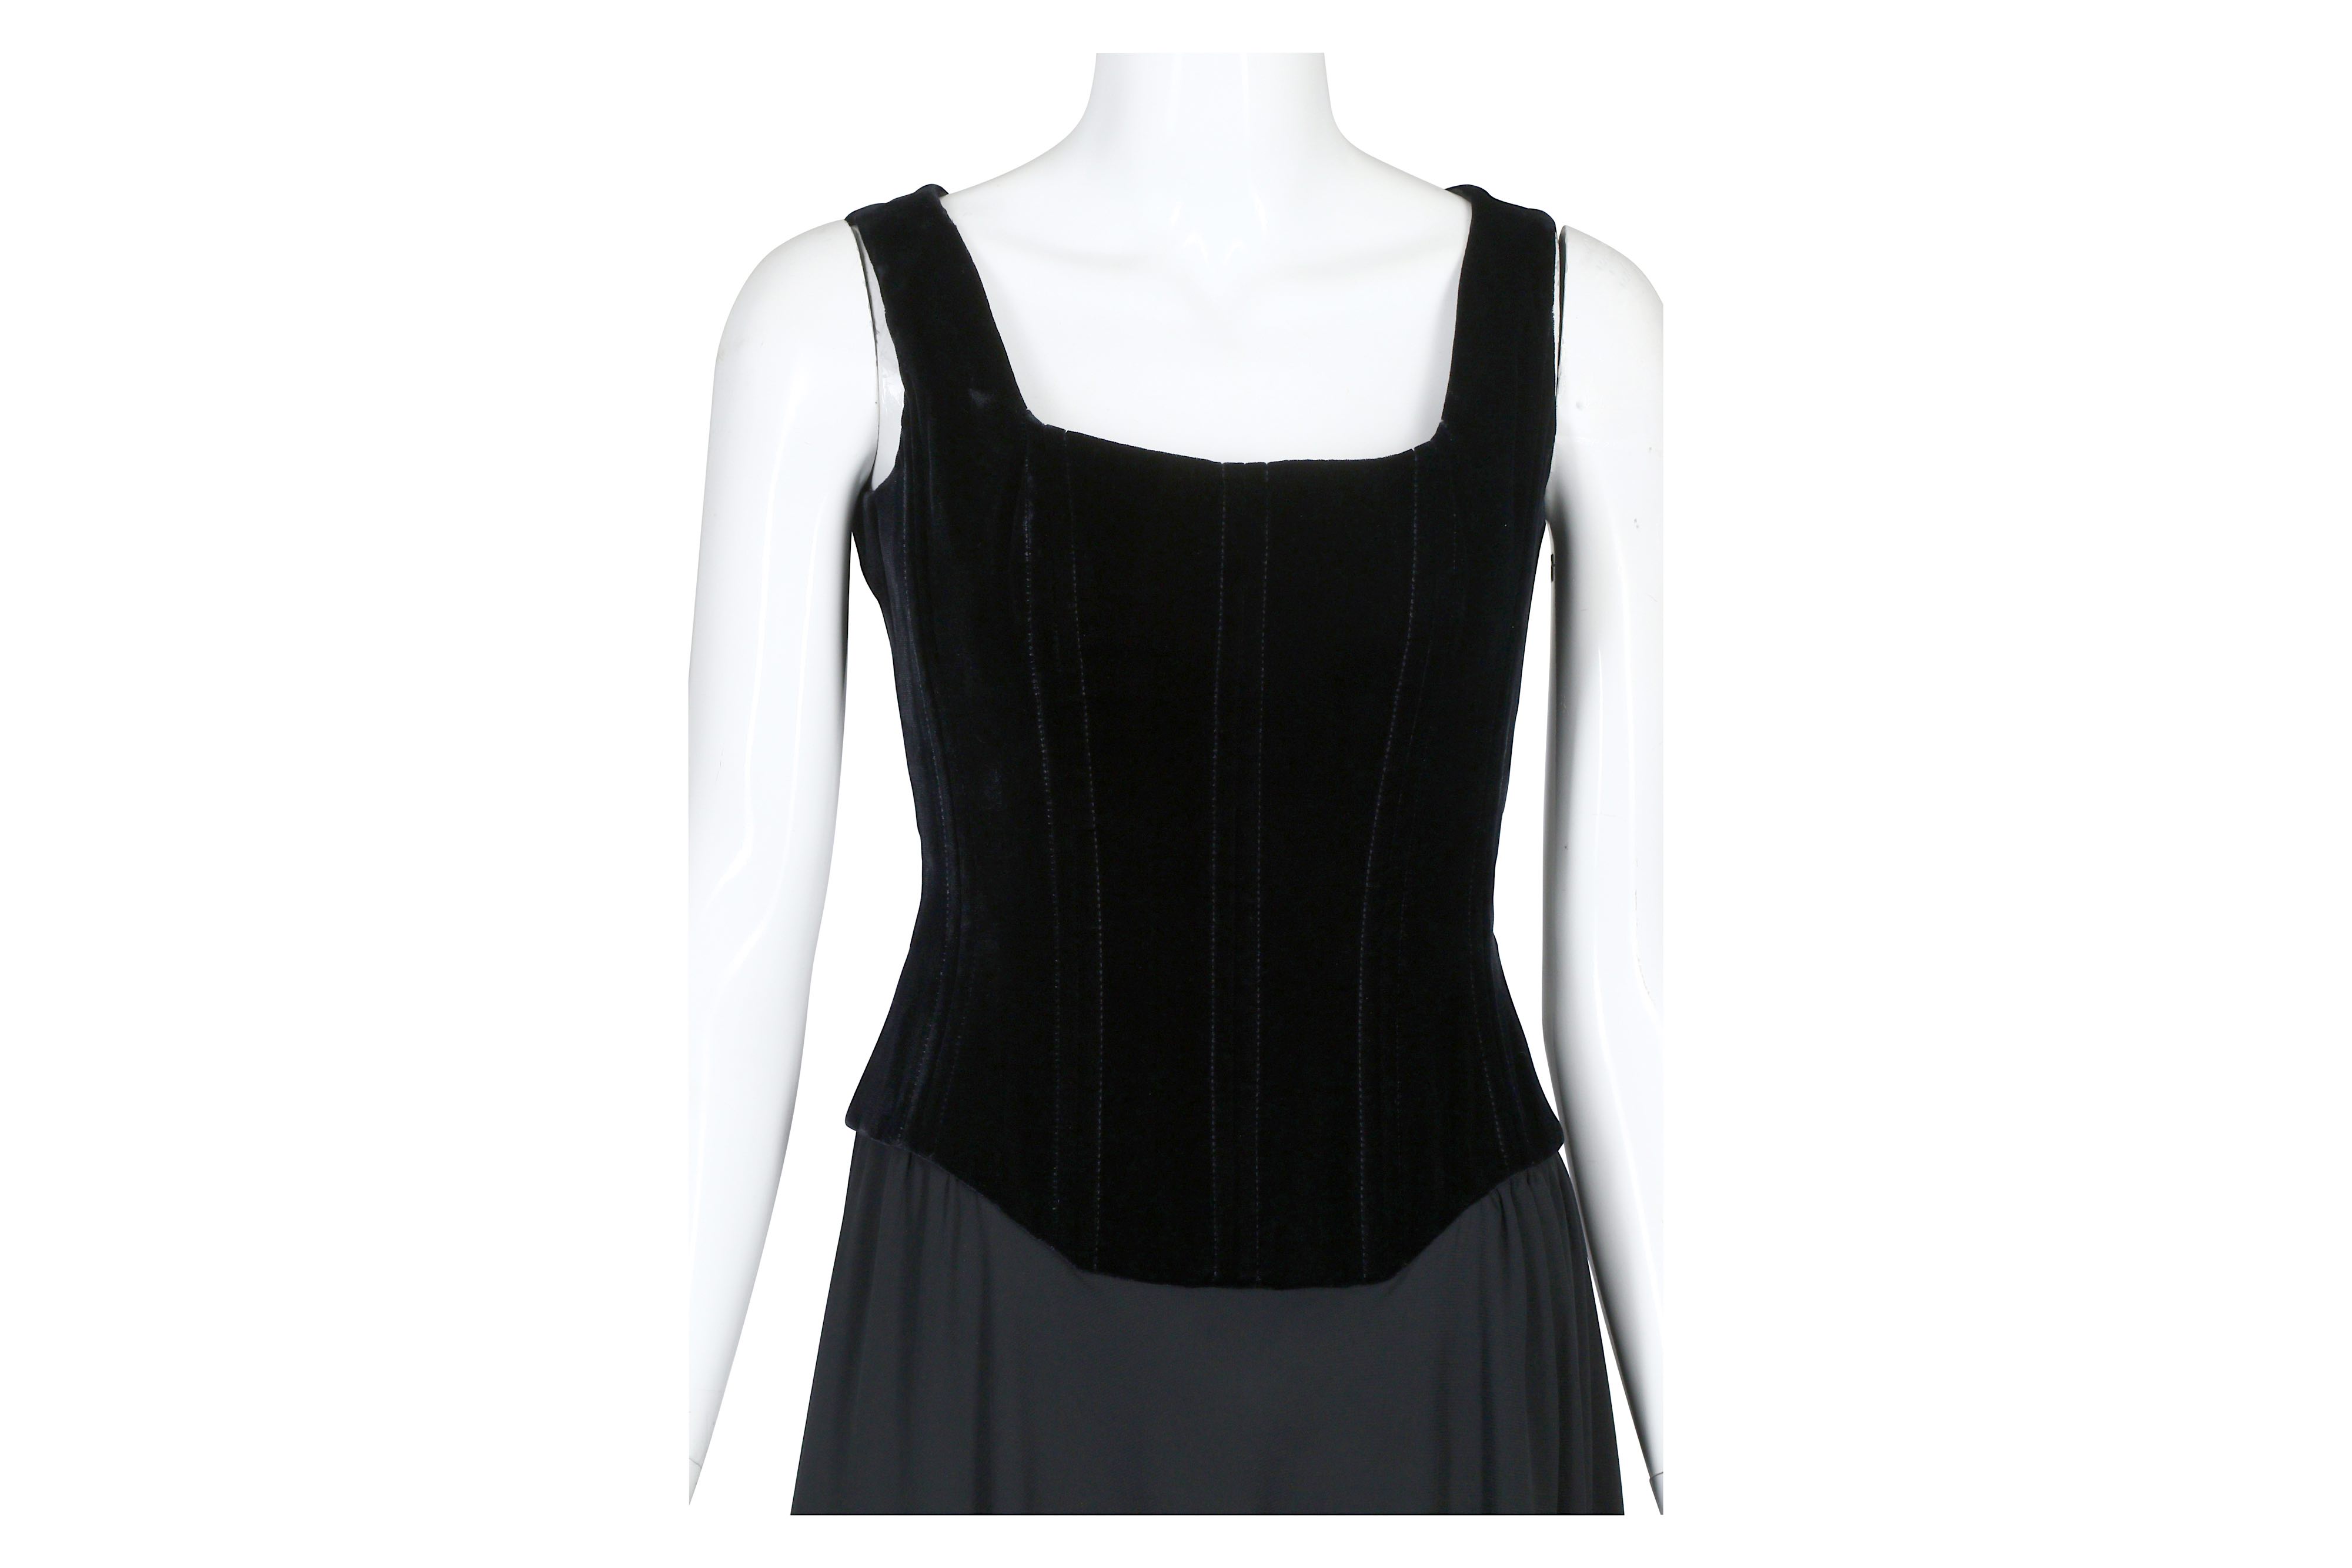 Chanel Black Velvet and Chiffon Fitted Dress - size 38 - Image 2 of 5